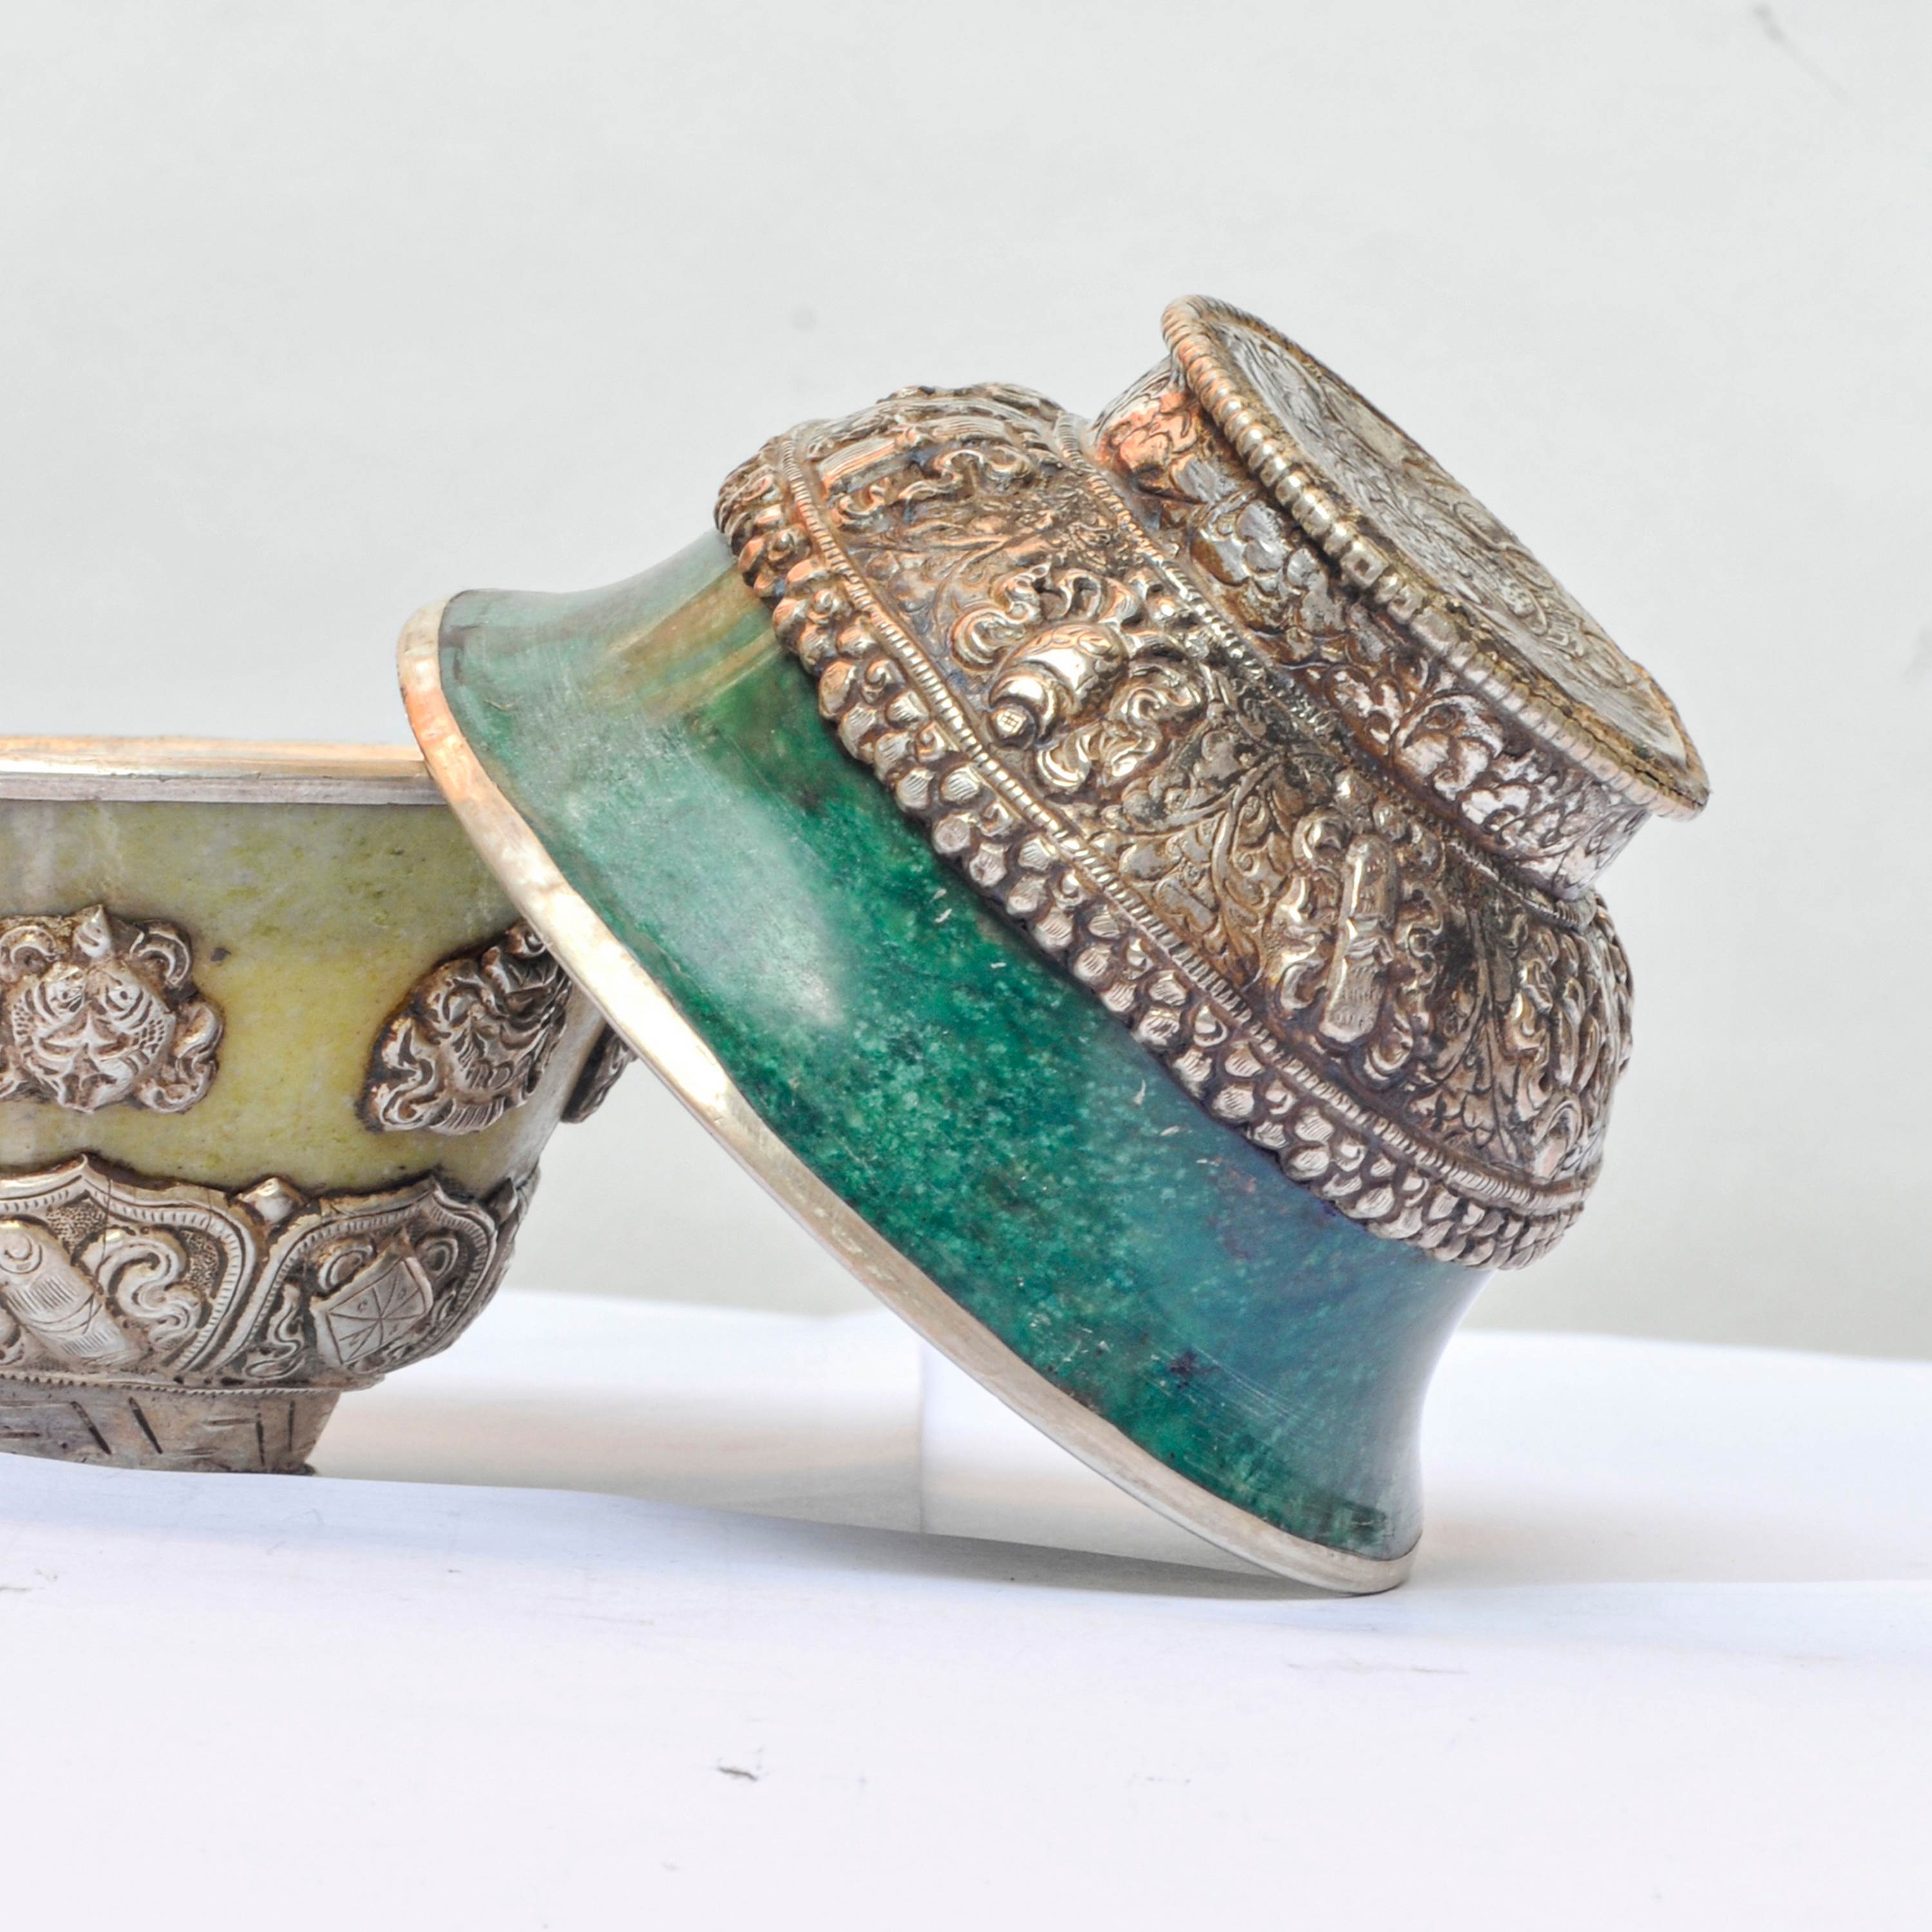 Silver Cup With Emitted amber Offering Bowls, silver Carving